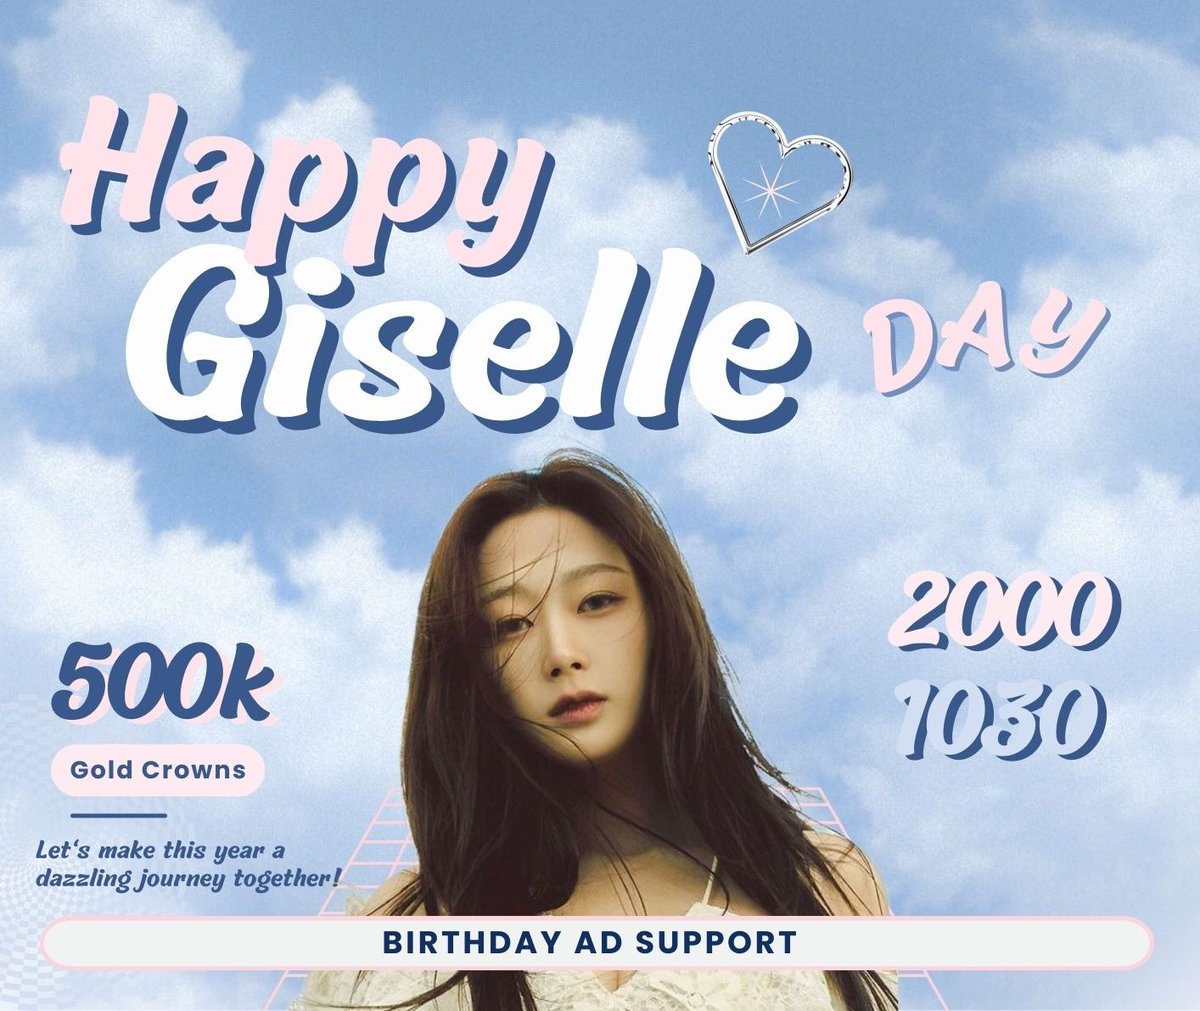 MYs and Aerishines! Support our birthday ad support for Giselle's birthday this year by donating gold crowns! Click the link for more info! 🔗: queeri.page.link/?link=https://… #GISELLE #지젤 #ジゼル #HEARTSFORGISELLE